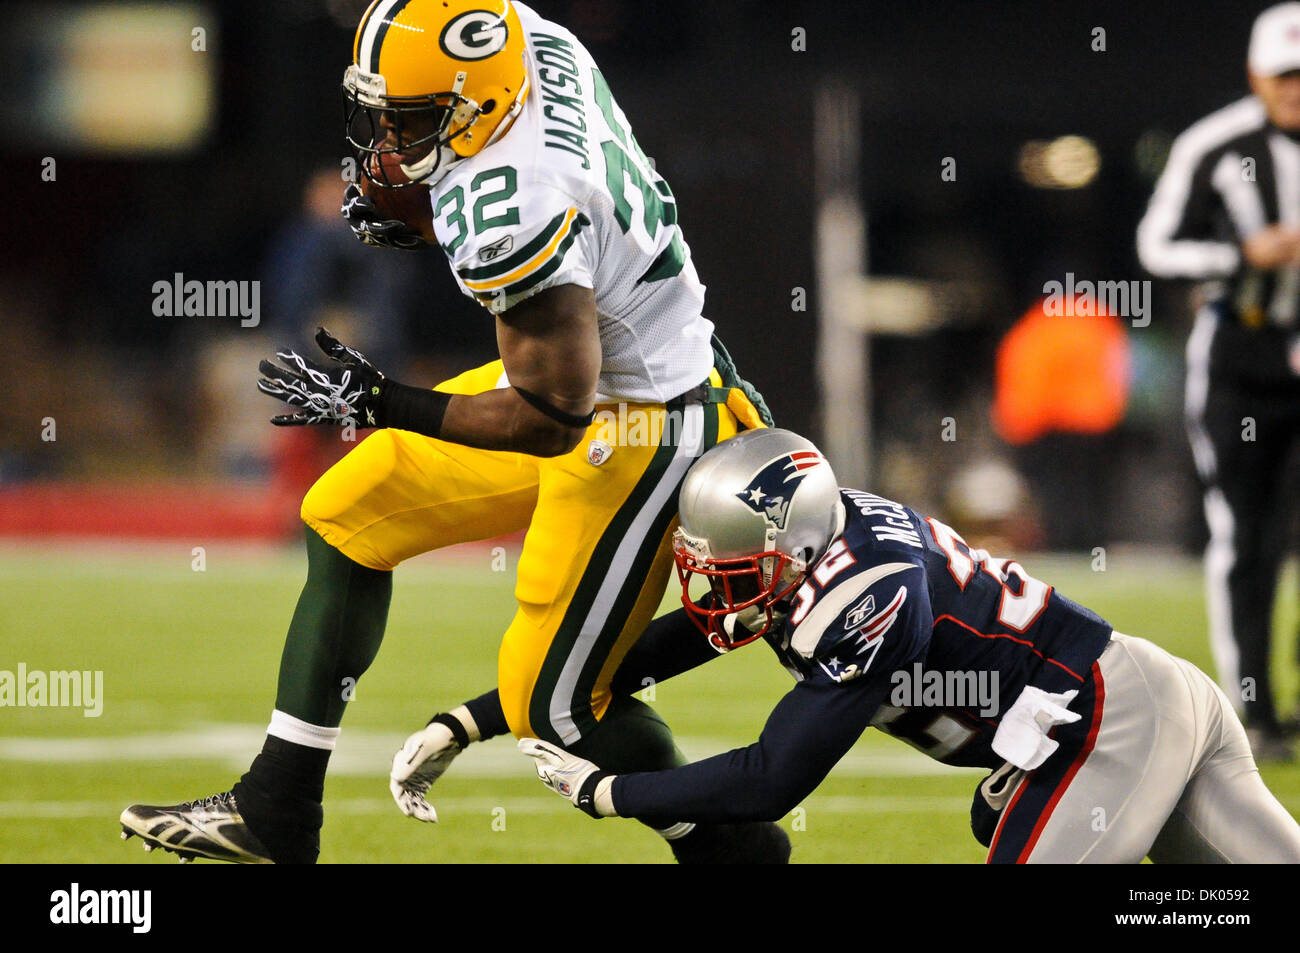 Dec. 19, 2010 - Foxborough, Massachusetts, United States of America - Packers RB Brandon Jackson (32) is tackled by New England Patriots' CB Devin McCourty (32). At the half the Green Bay Packers leads the New England Patriots 17 - 14 at Gillette Stadium. (Credit Image: © Geoff Bolte/Southcreek Global/ZUMAPRESS.com) Stock Photo